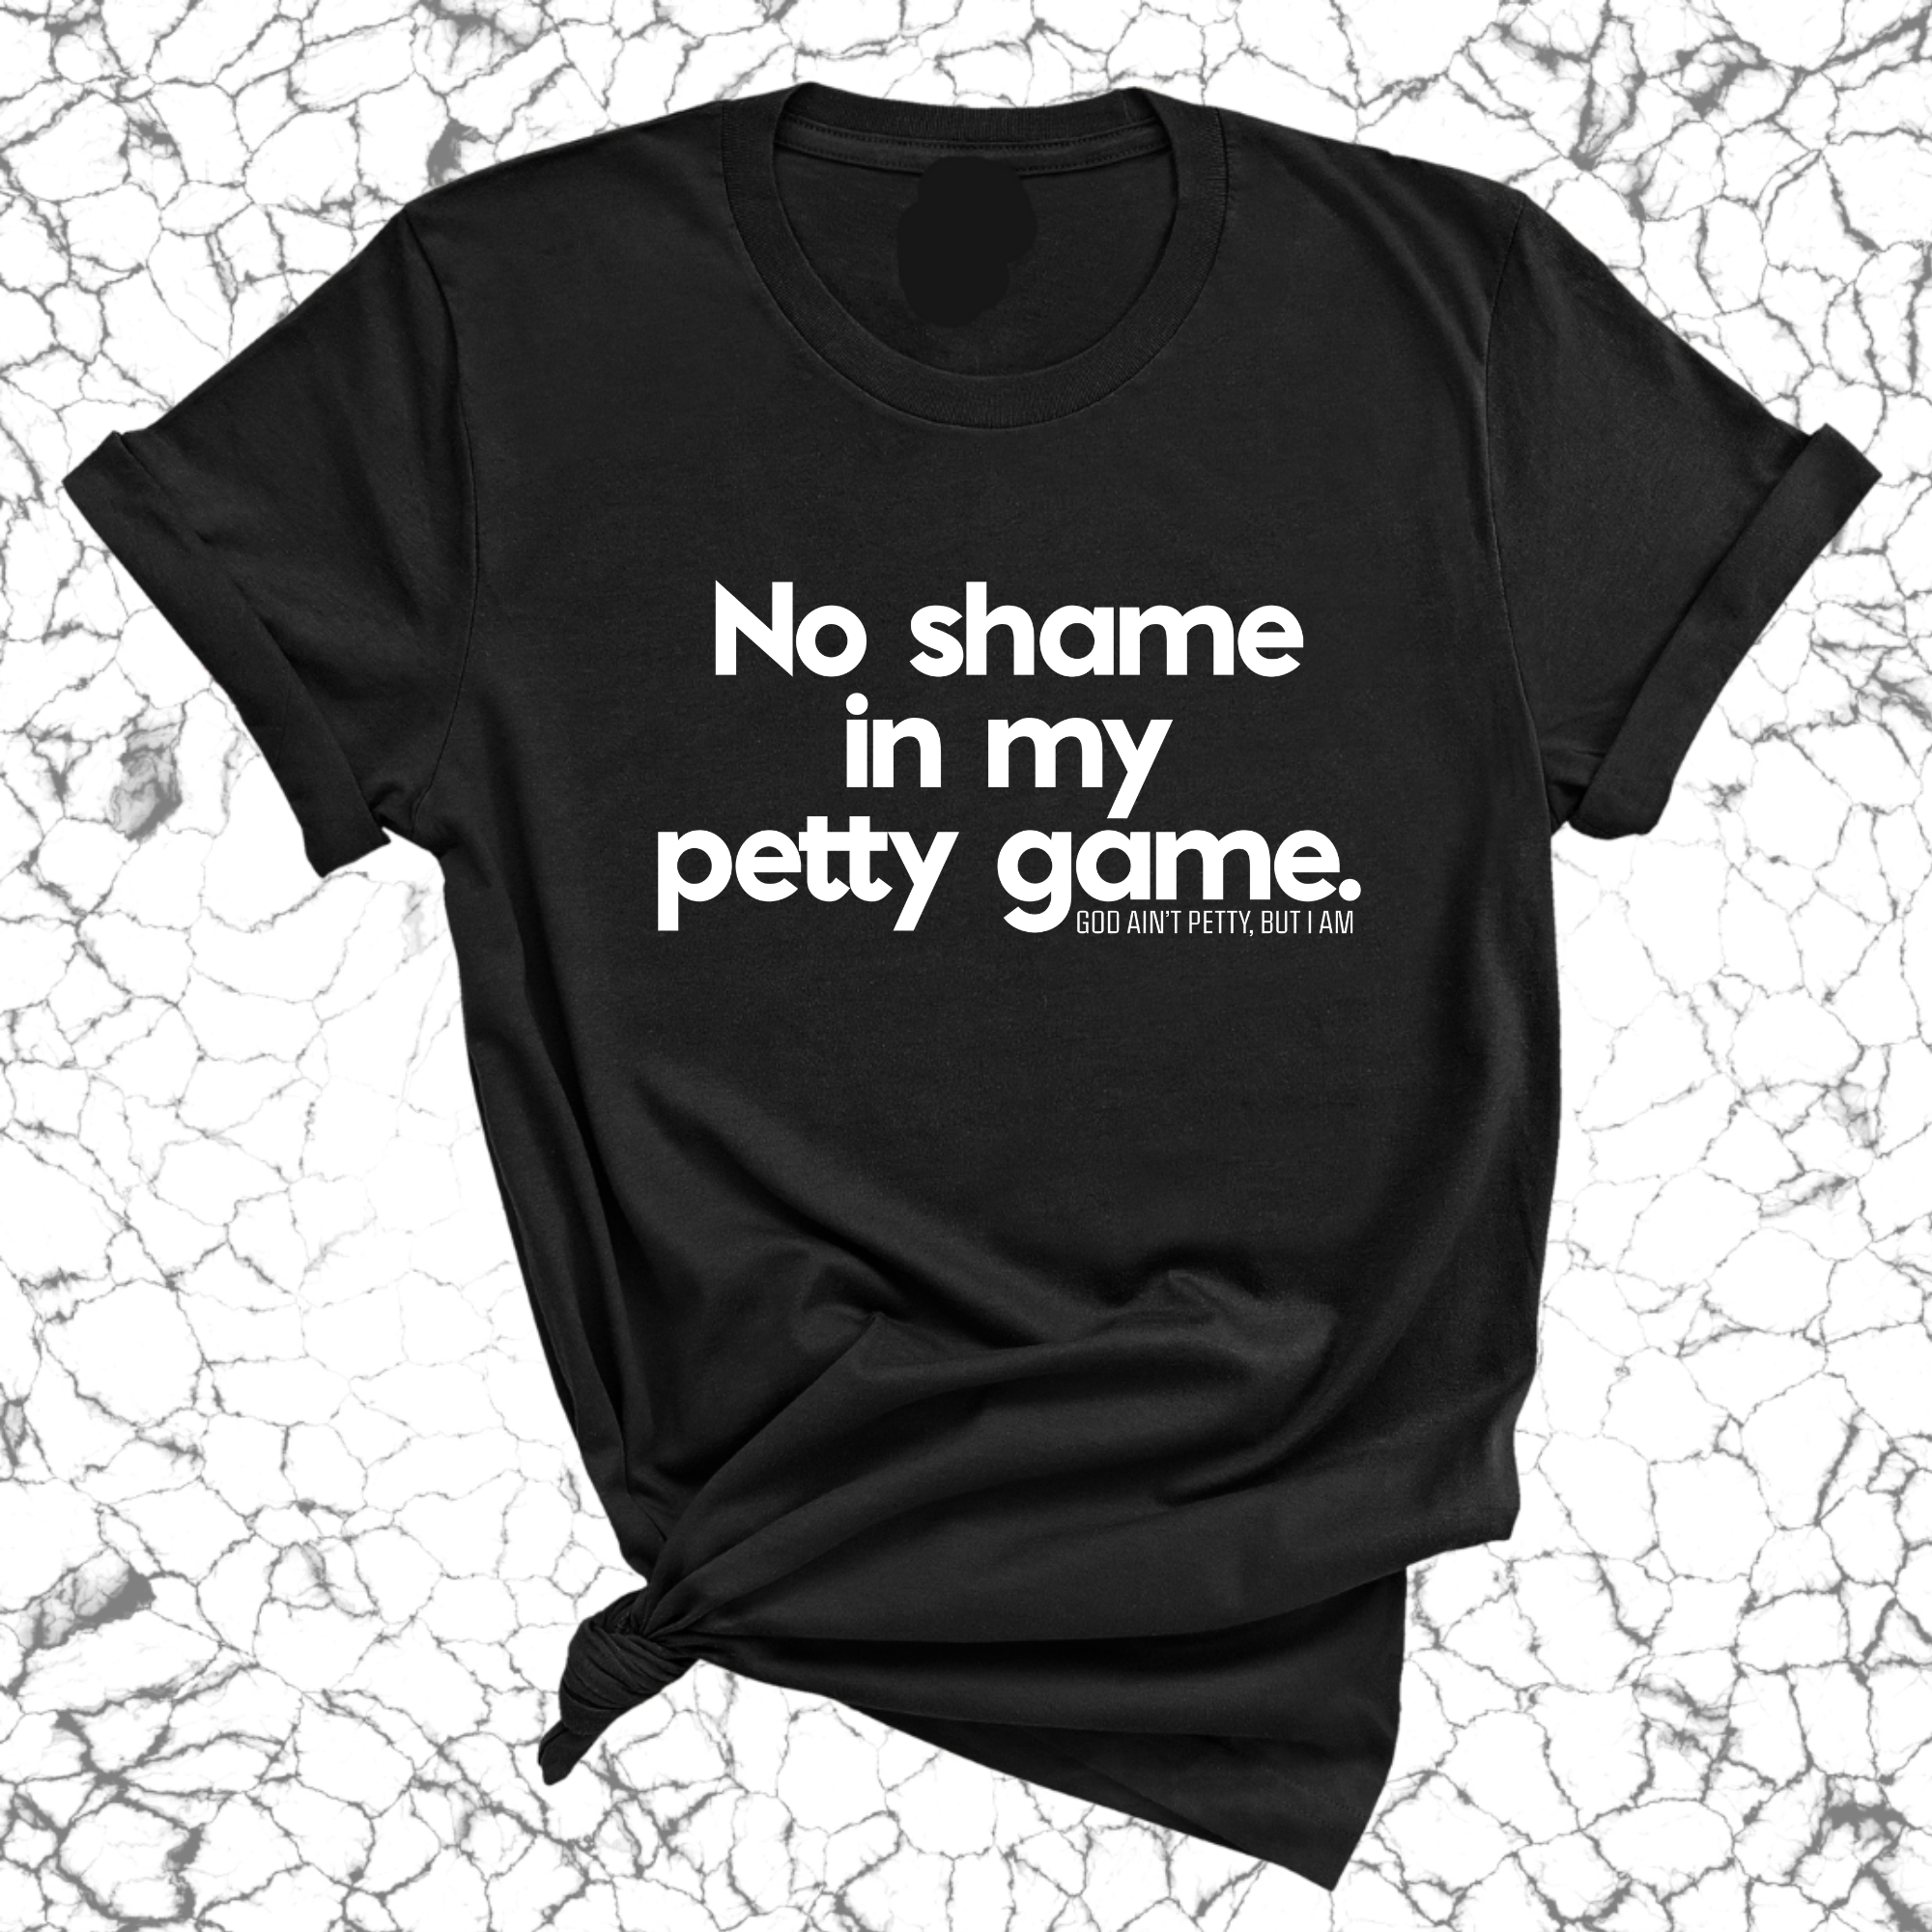 No Shame in my Petty Game Unisex Tee-T-Shirt-The Original God Ain't Petty But I Am